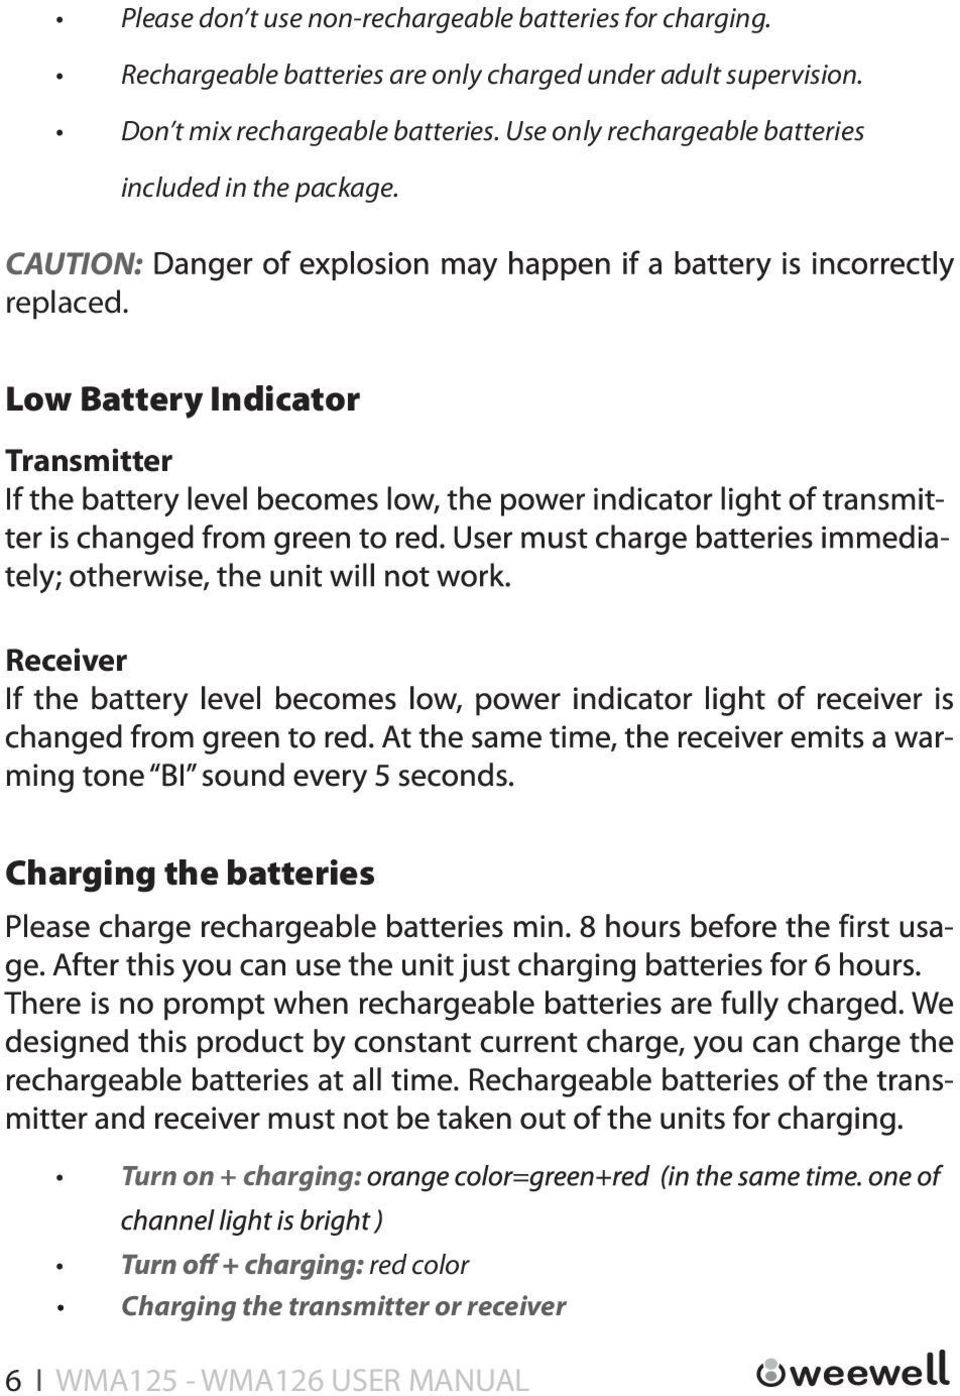 Use only rechargeable batteries CAUTION: replaced. included in the package.